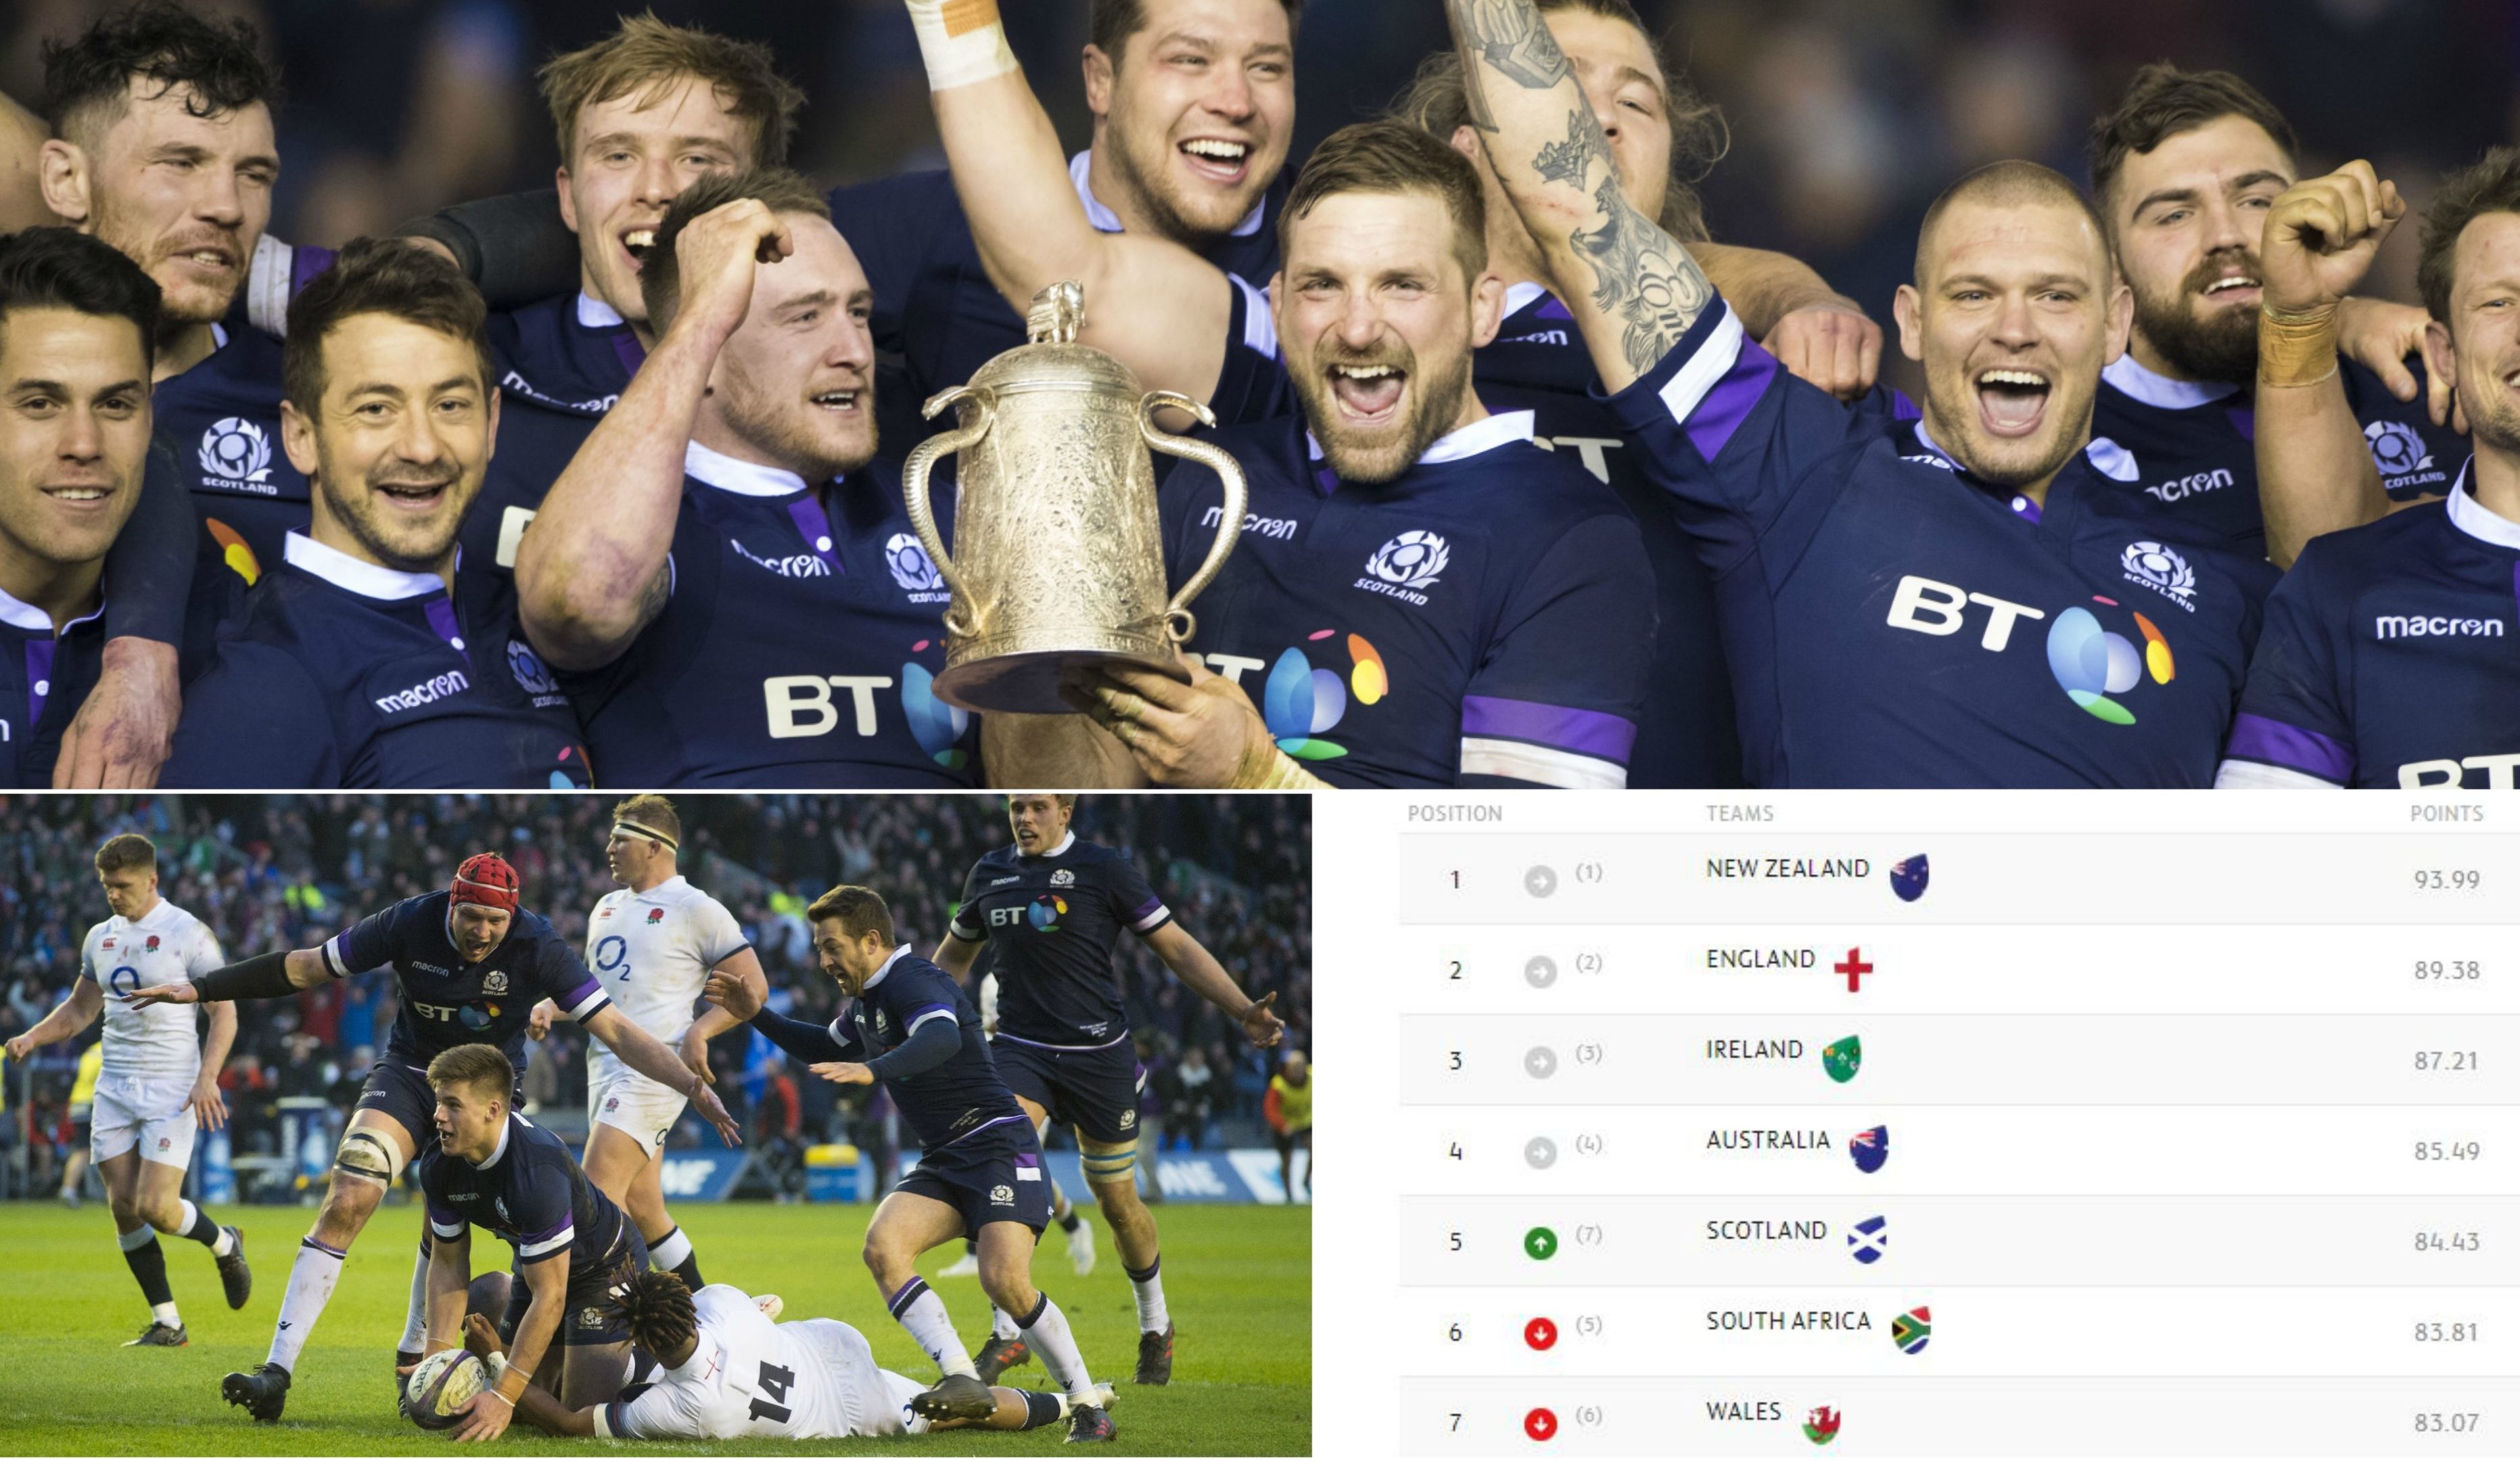 Scotland are ranked fifth in the world following victory over England